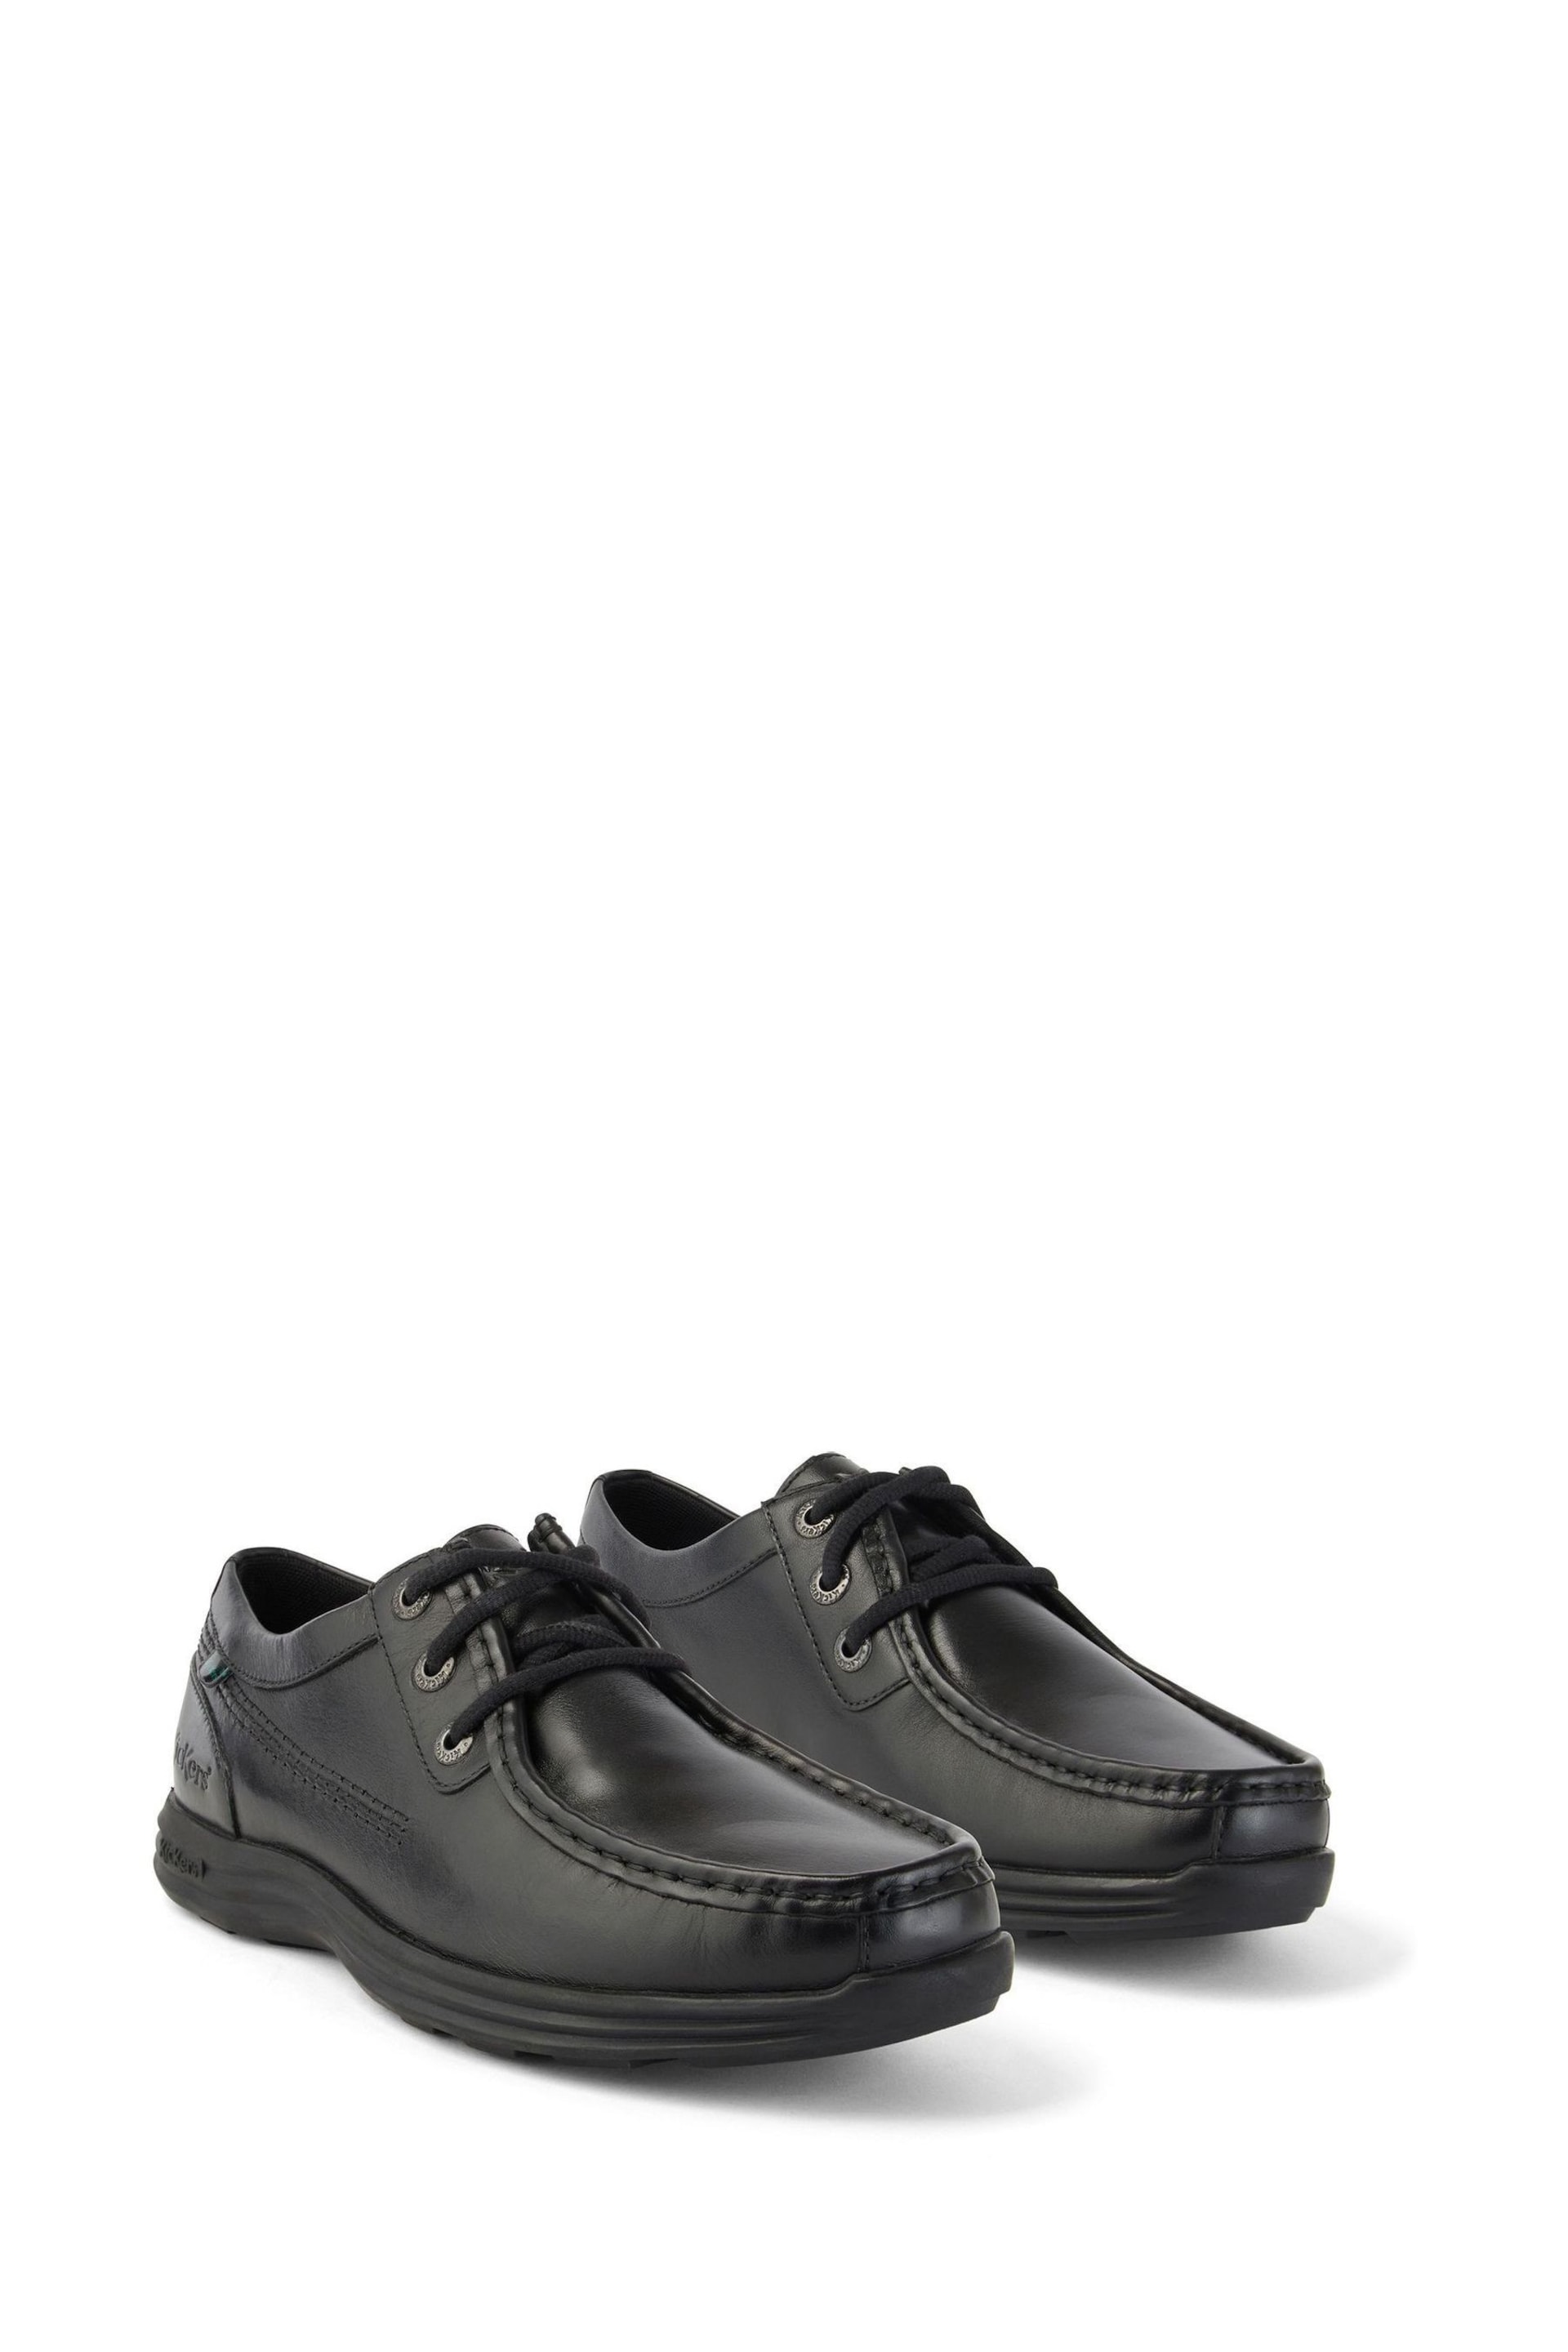 Kickers Reasan Mocc Leather Shoes - Image 2 of 6